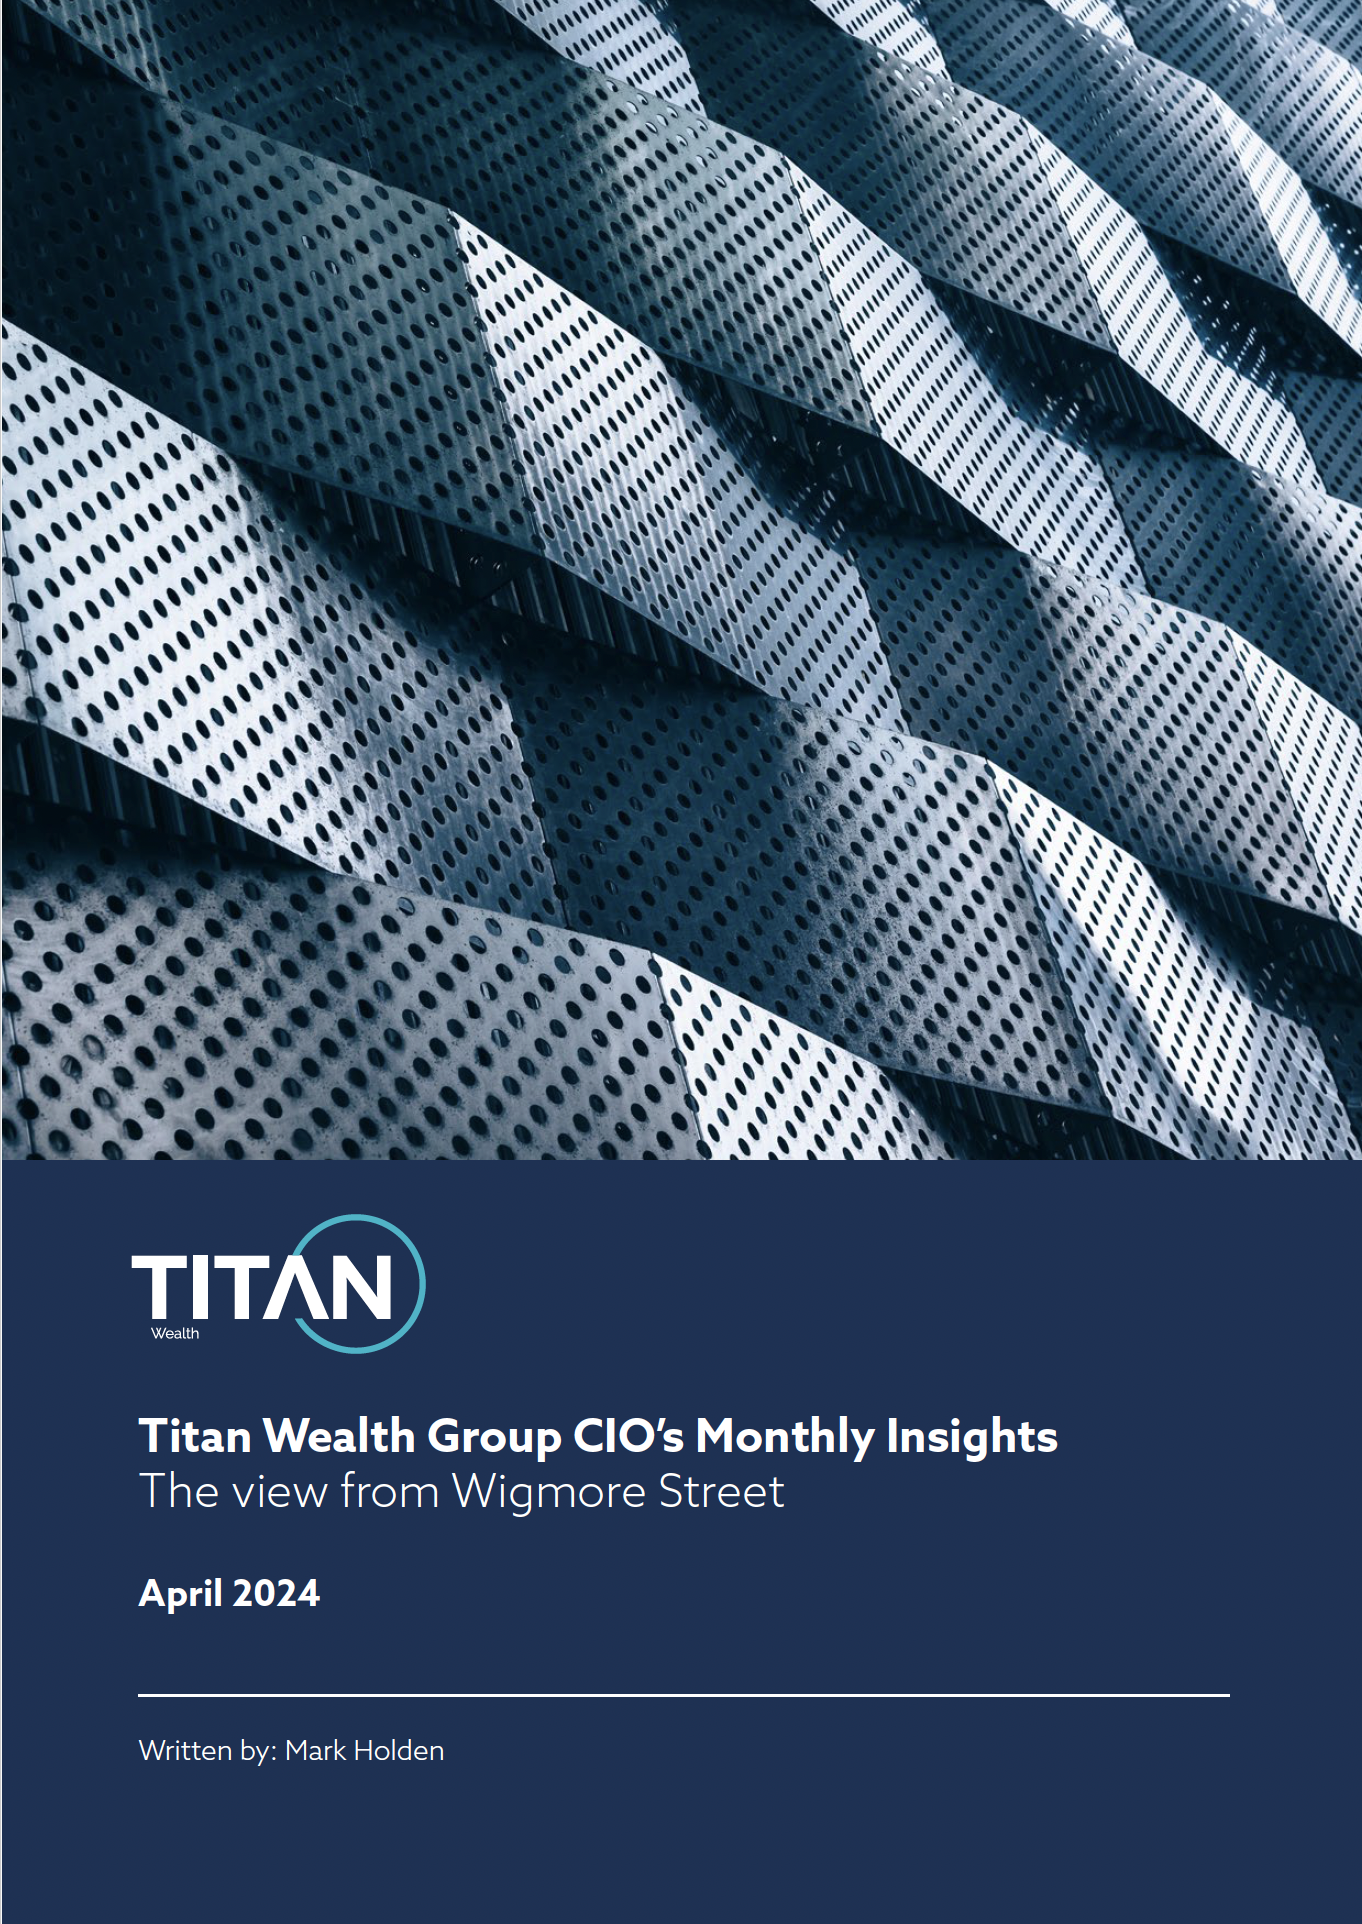 Titan Group CIO's Monthly Insights April 24